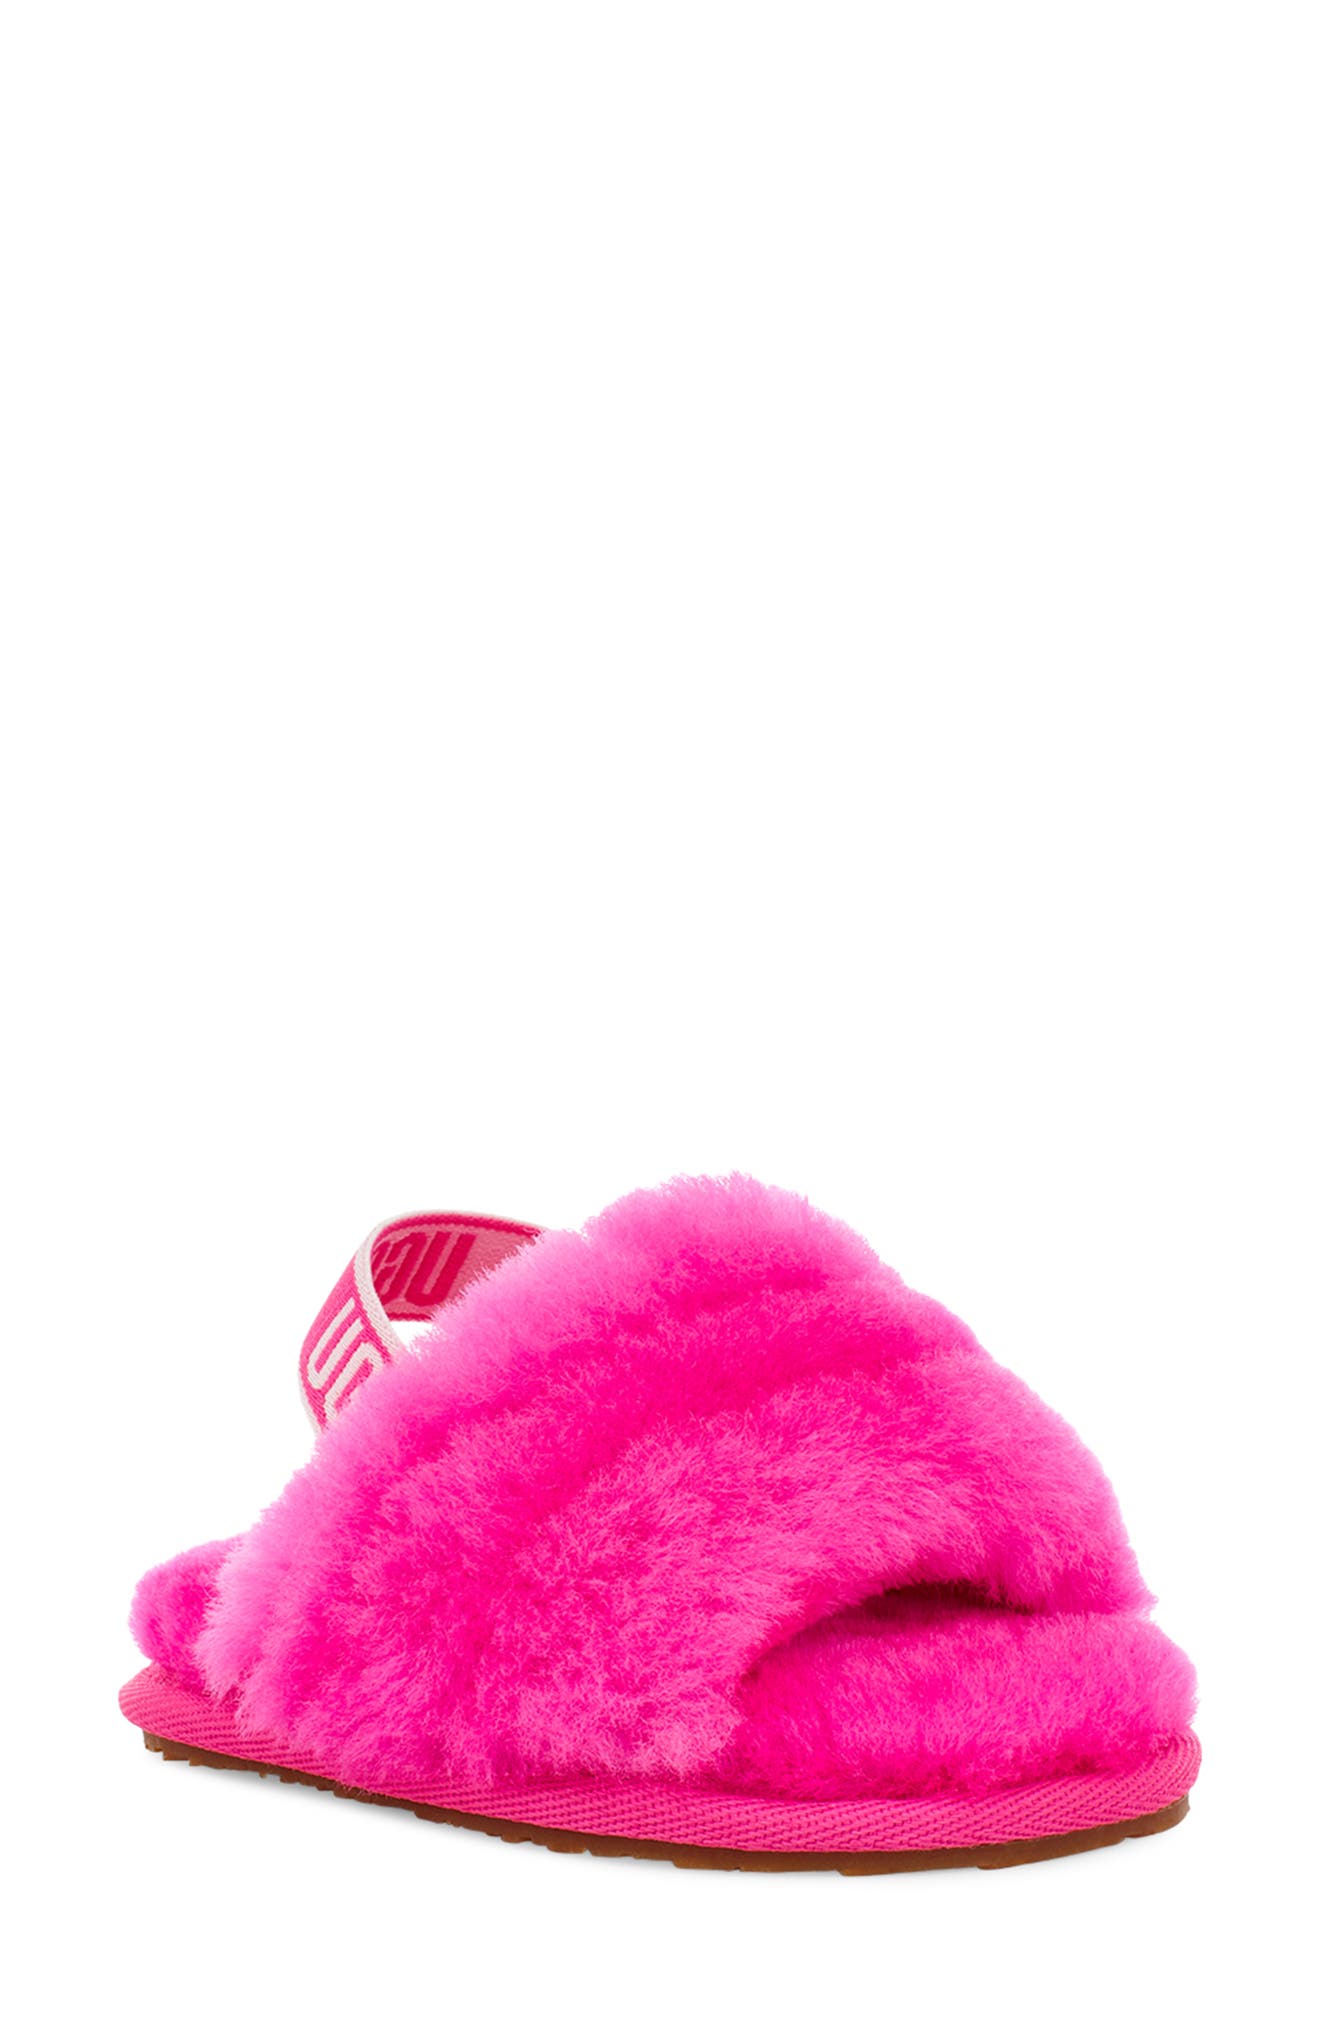 childrens pink ugg slippers